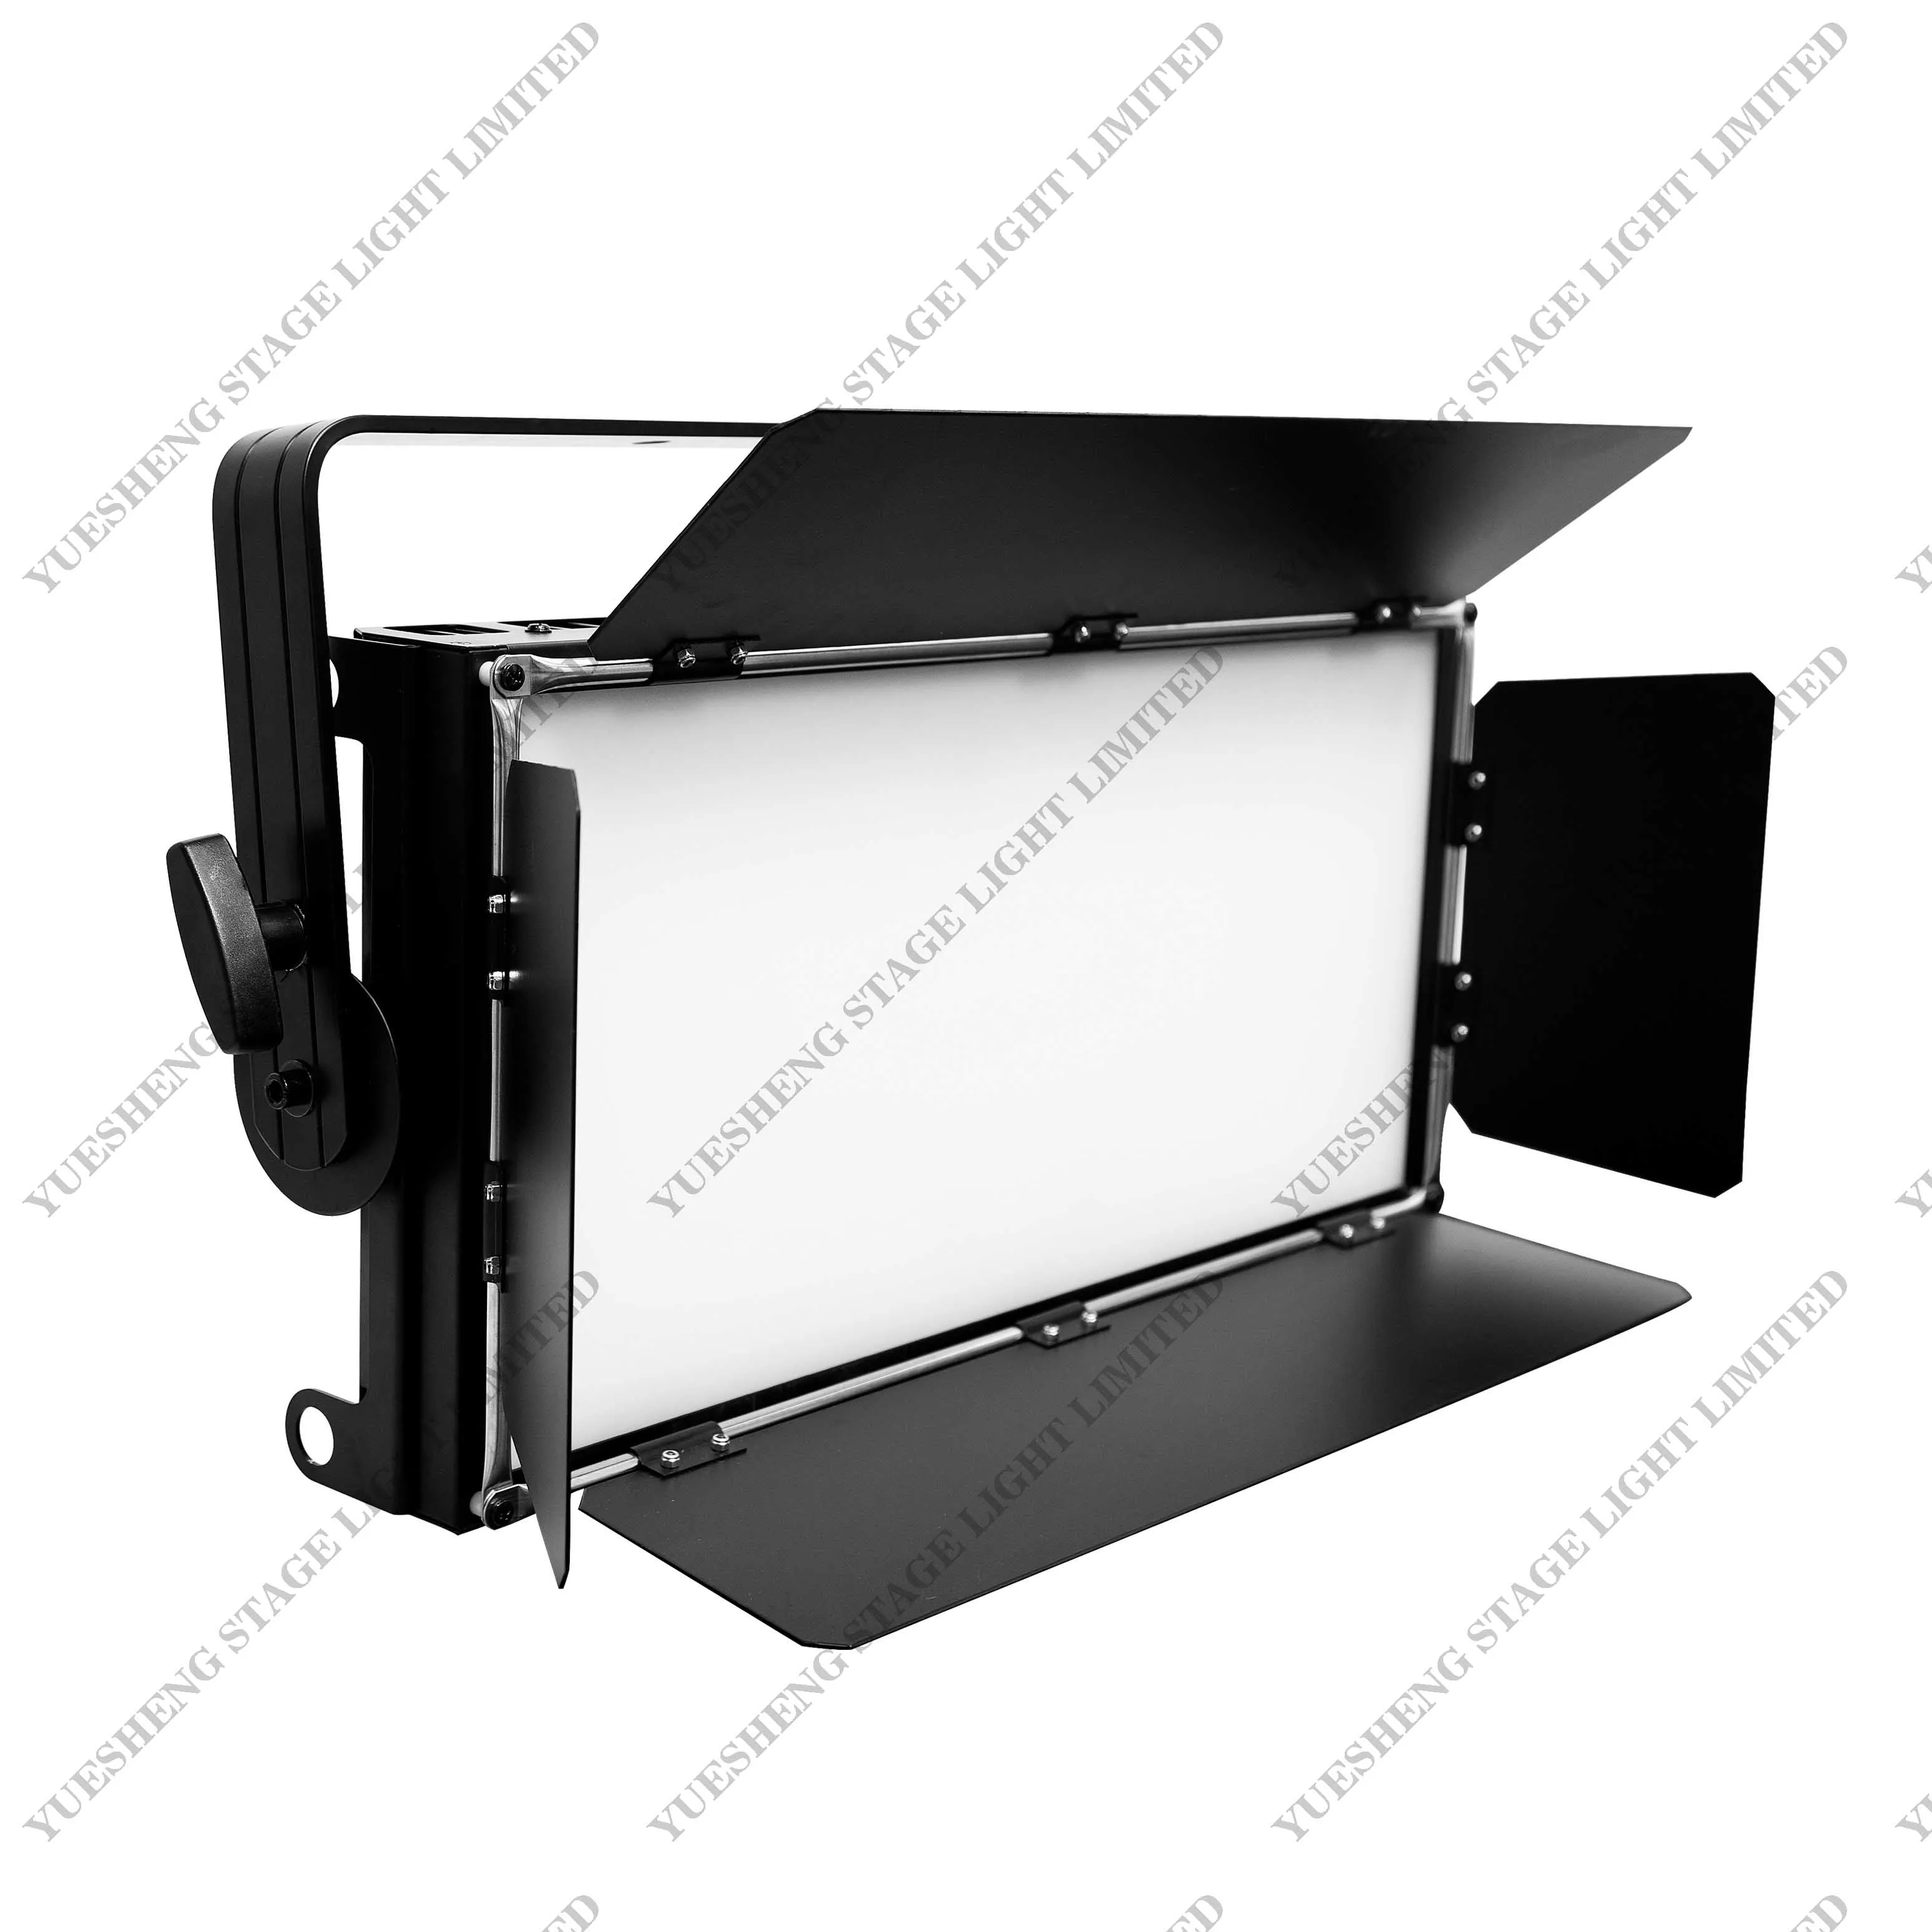 LED 200W RGBW 4 Colorful Video Panel Light For Project Installation